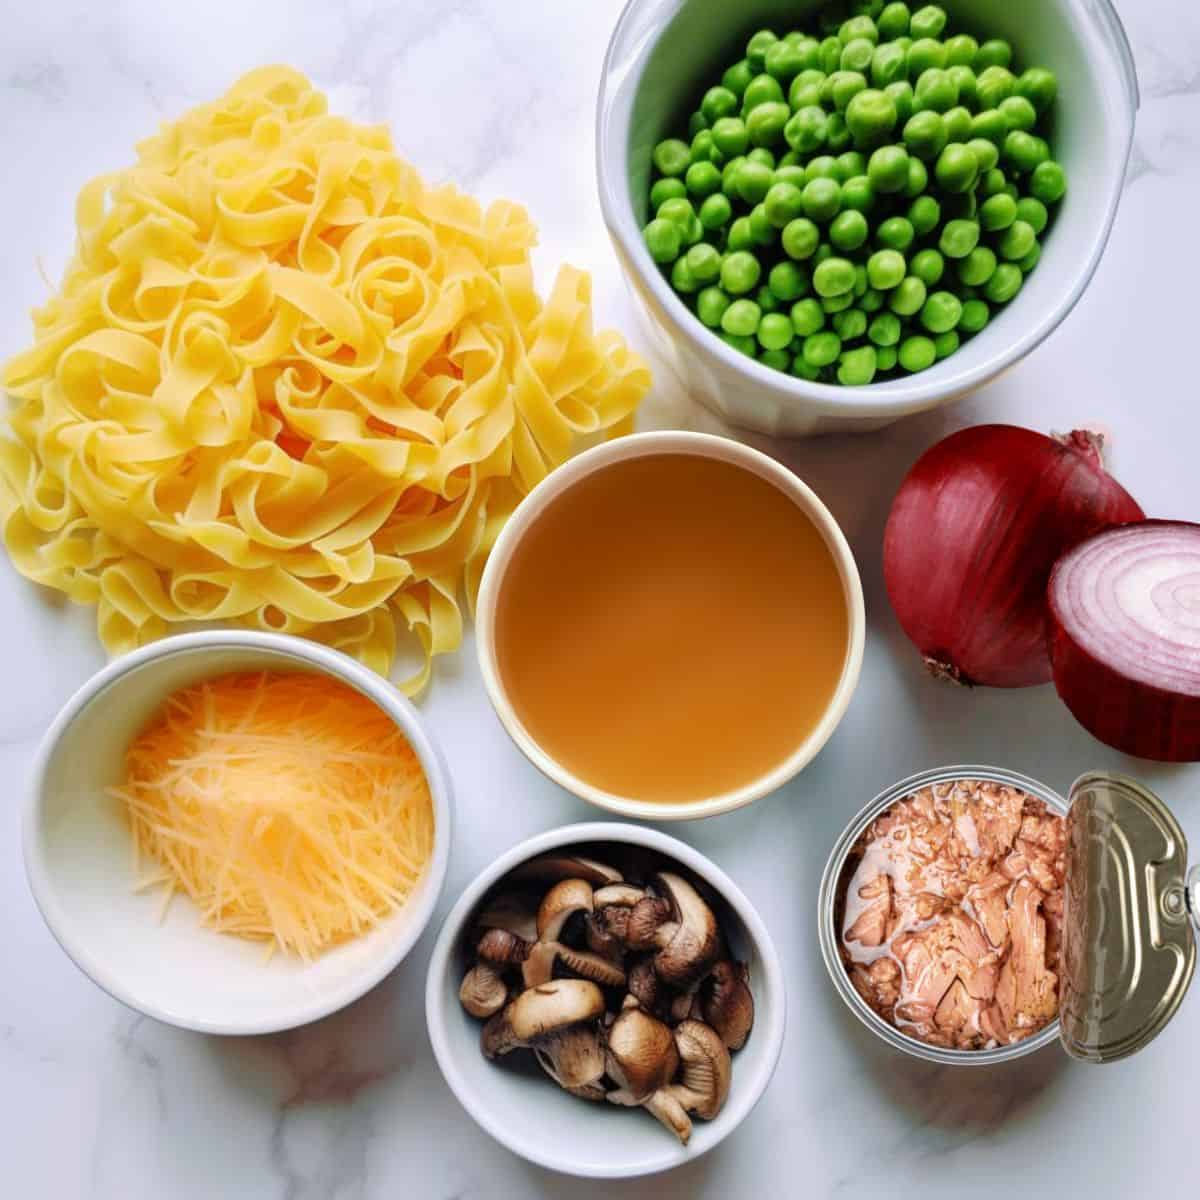 ingredients for tuna casserole on white cutting board